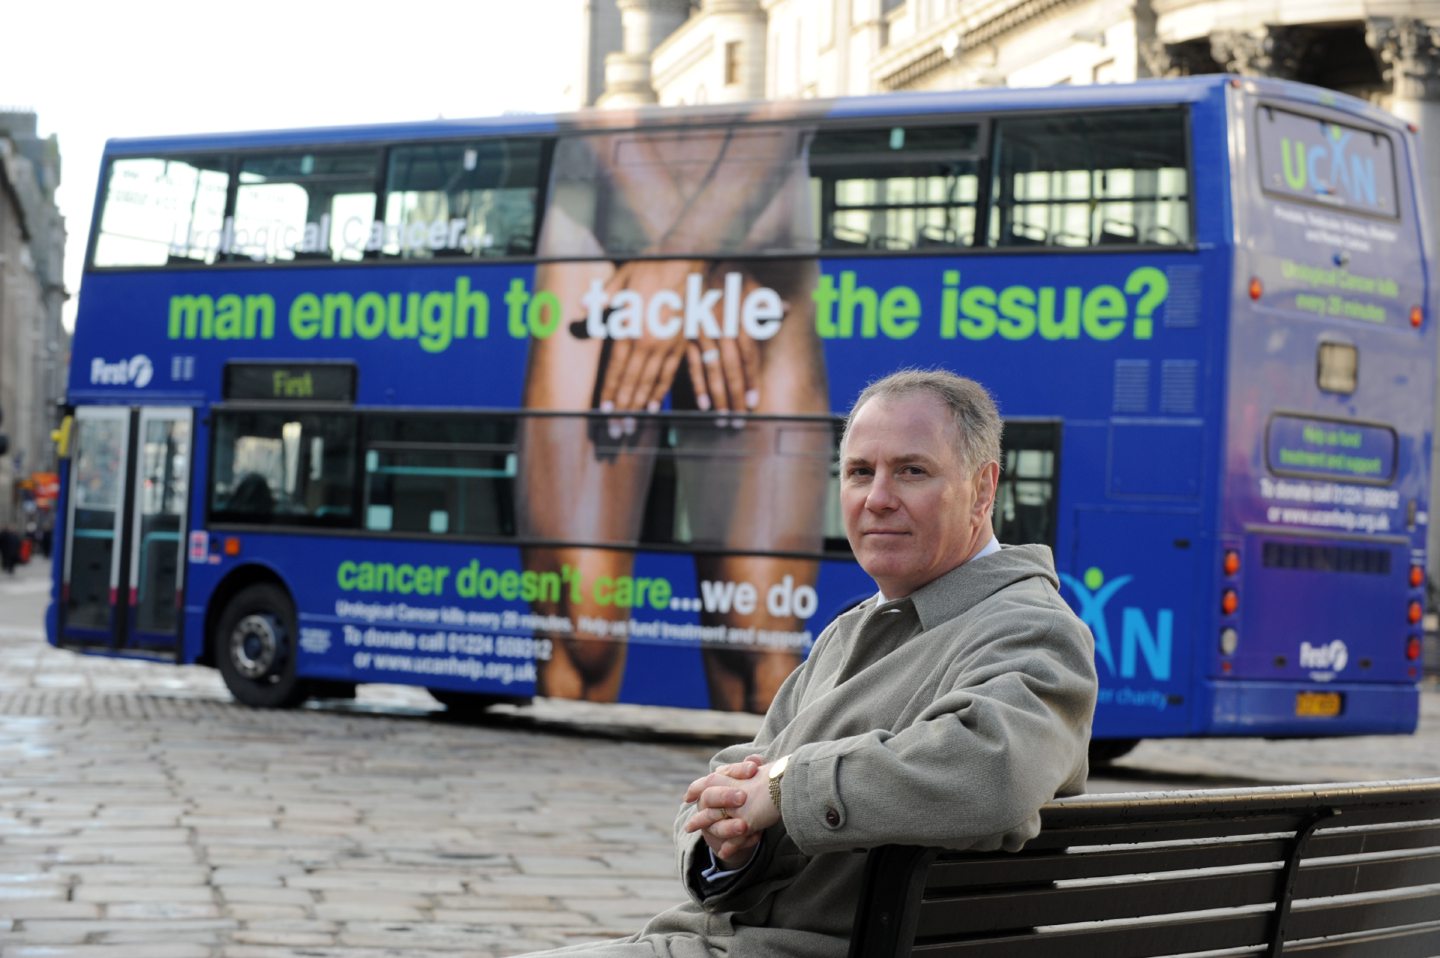 UCAN co-founder Sam McClinton with one of the bus ads in January 2008